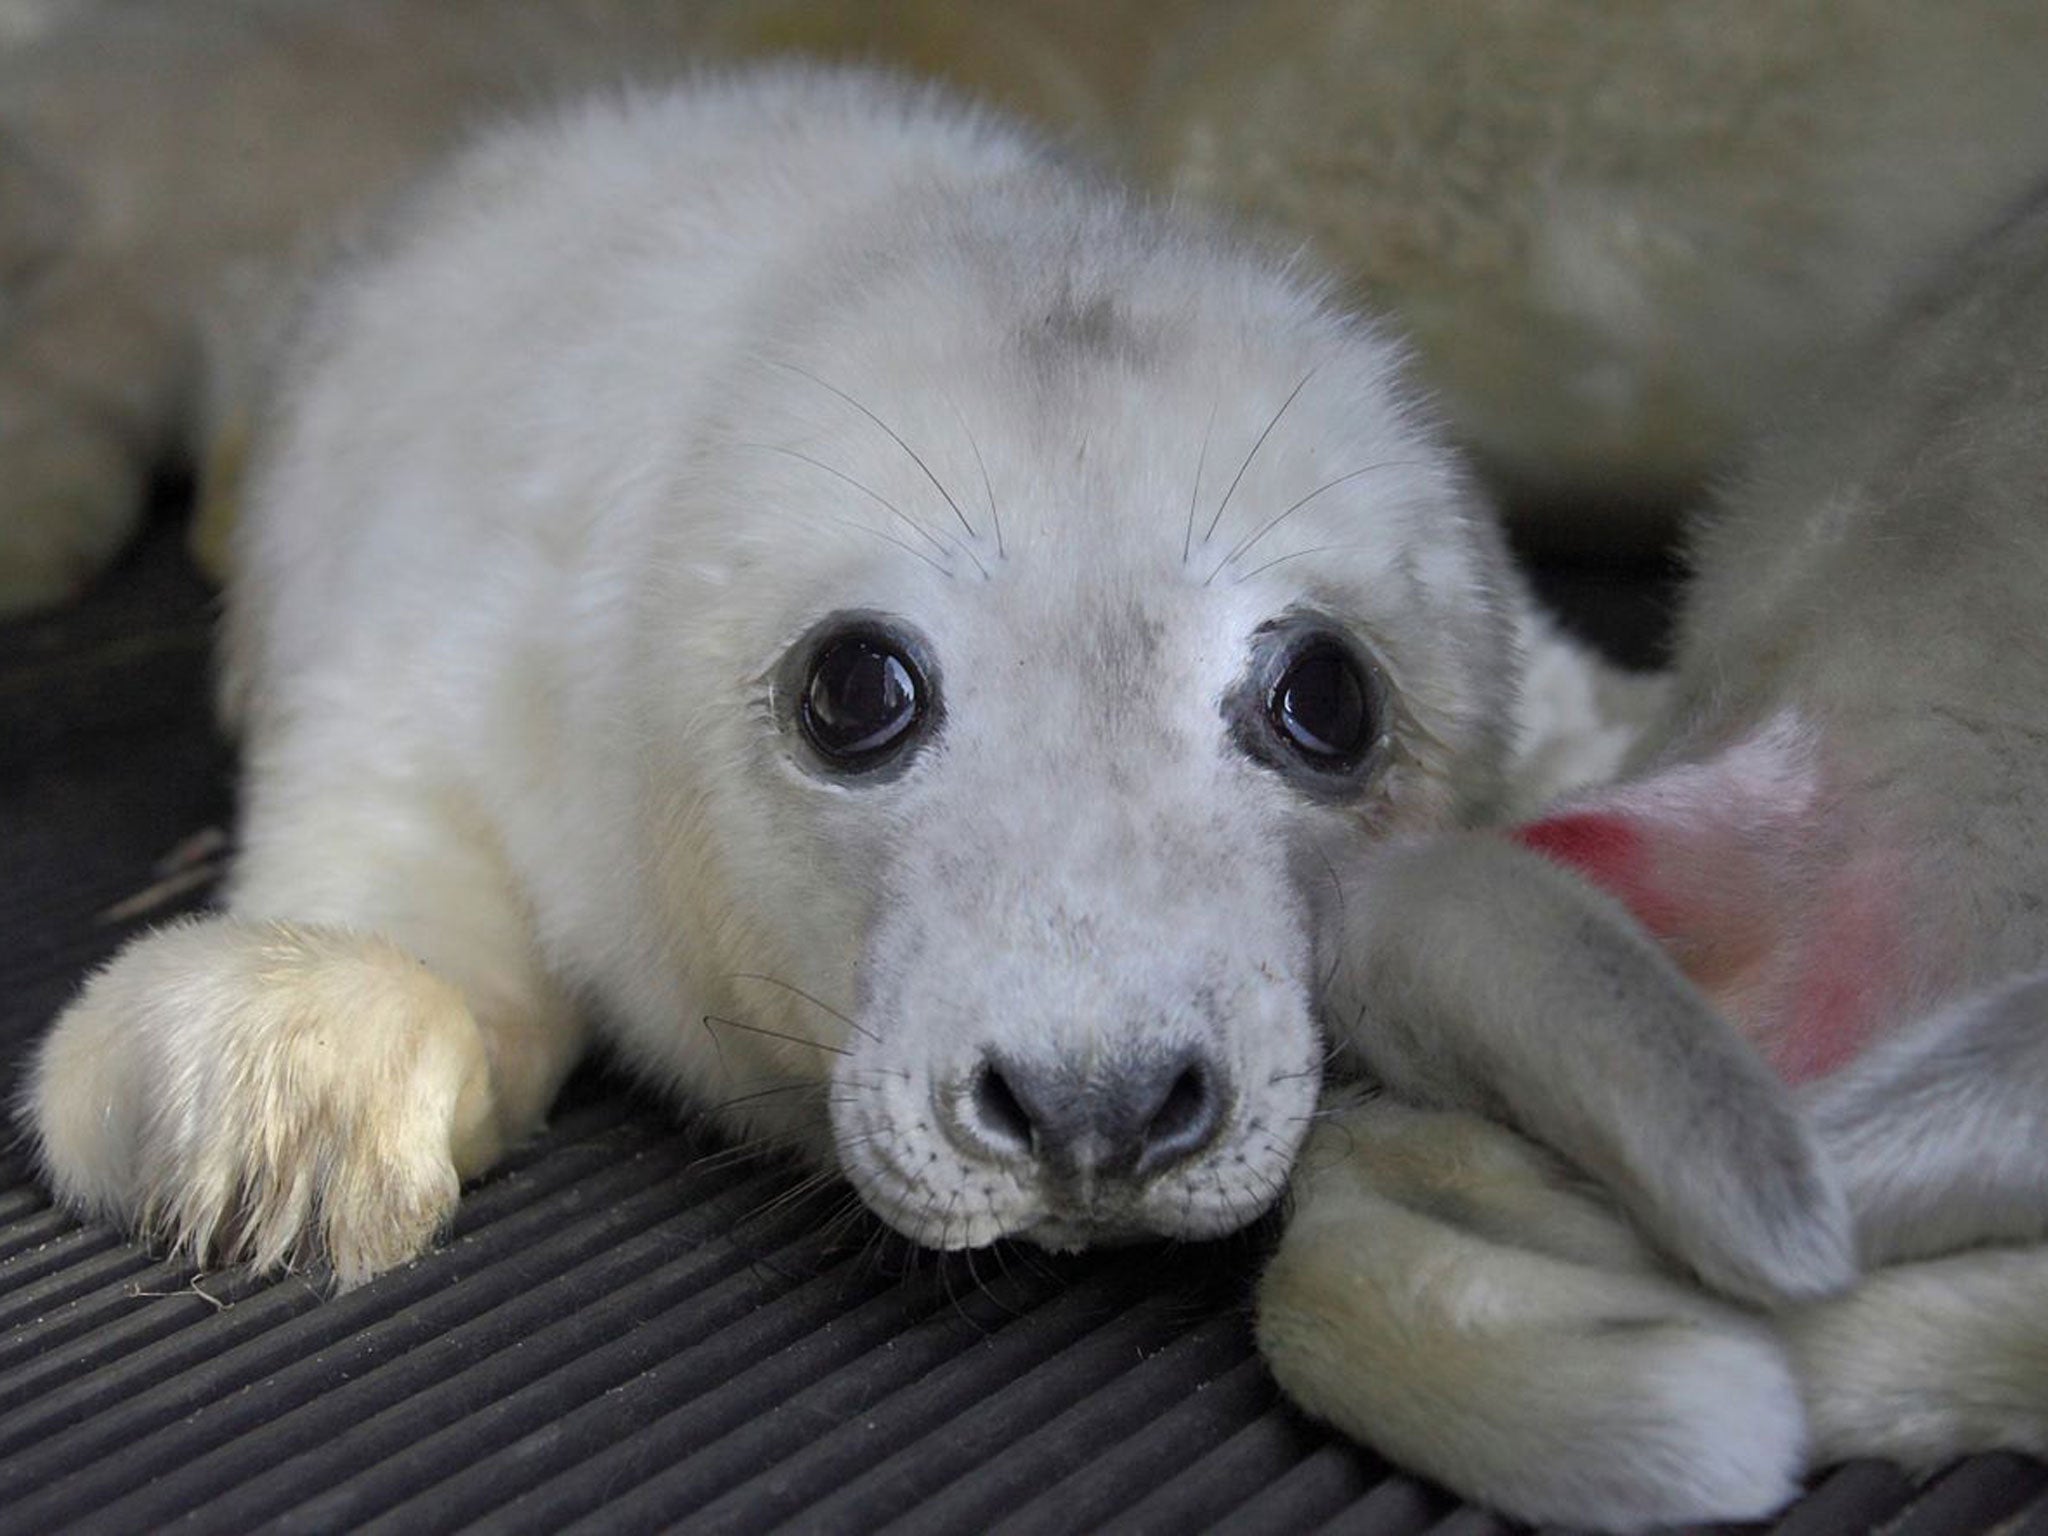 The team at RSPCA East Winch are looking after injured seal pups following a tidal surge on the Norfolk coast.